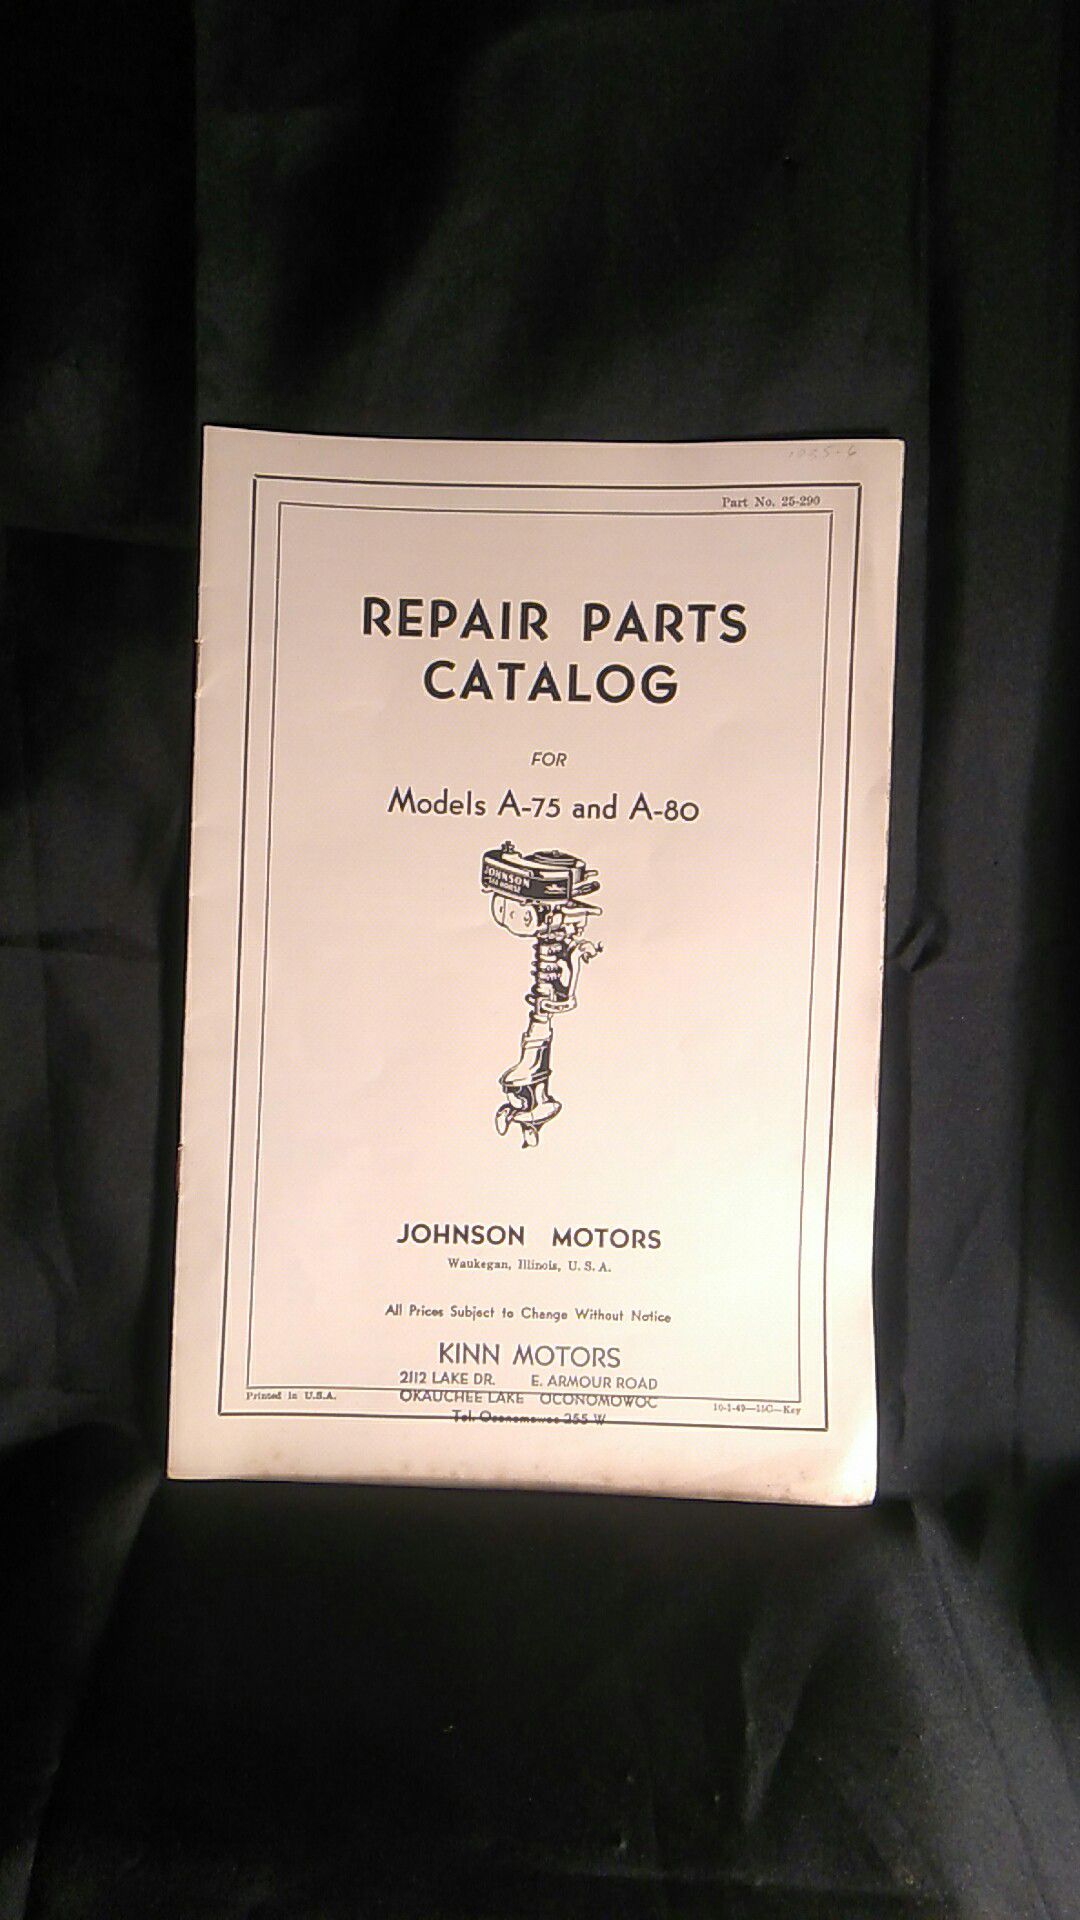 Johnson Outboard Motors Repair Parts Catalog For Model A-75 and A-80 Part # 25-290